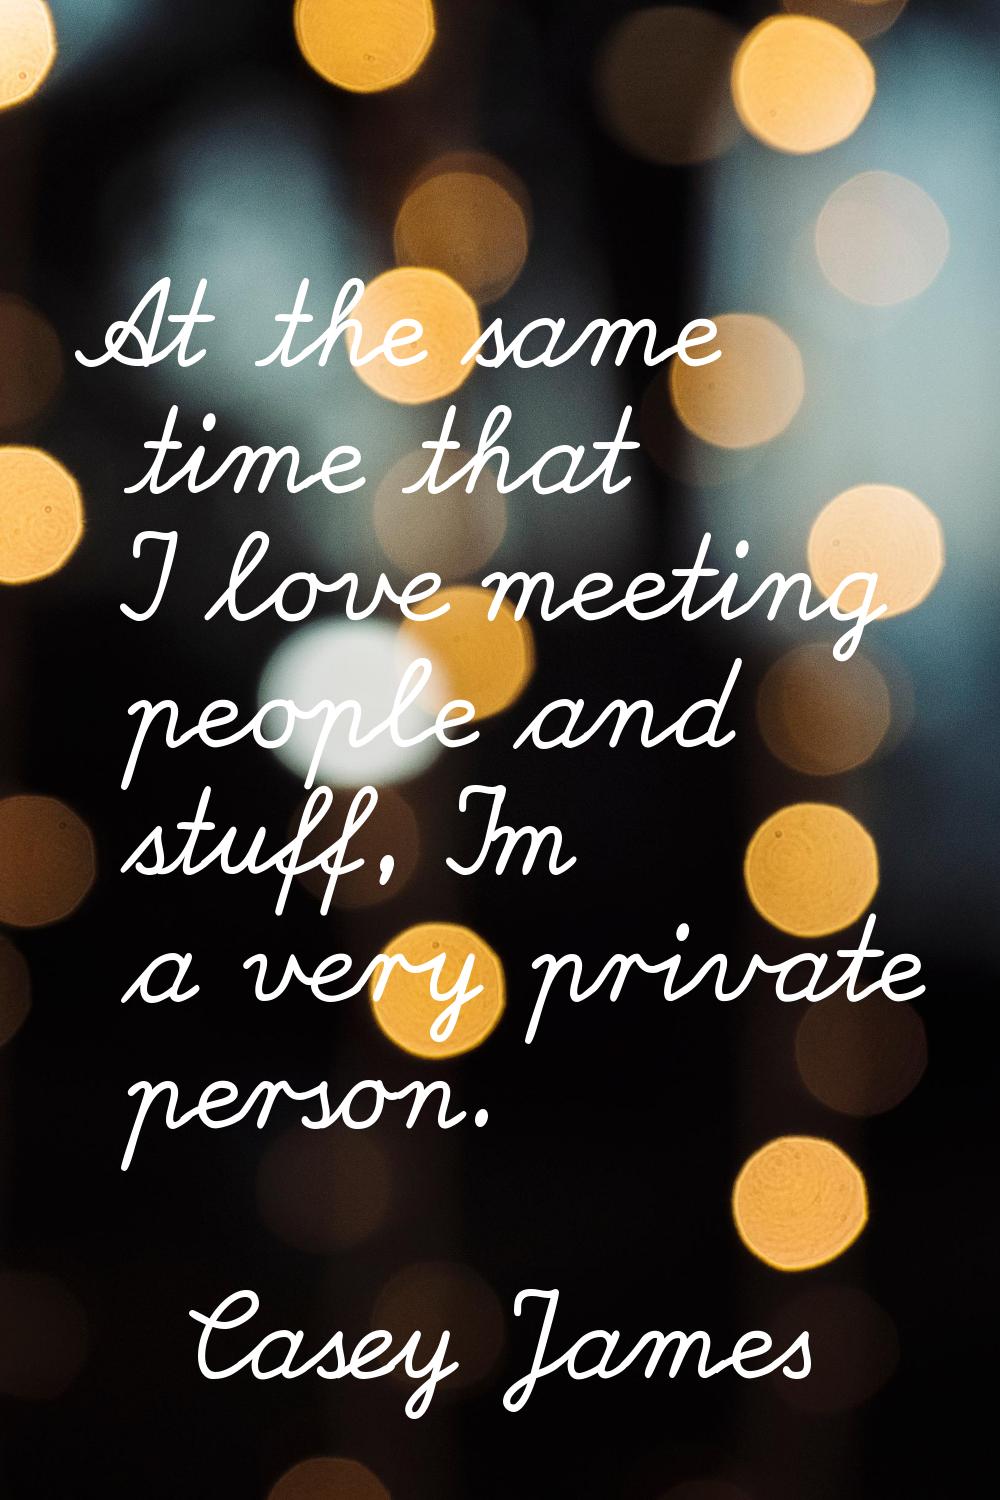 At the same time that I love meeting people and stuff, I'm a very private person.